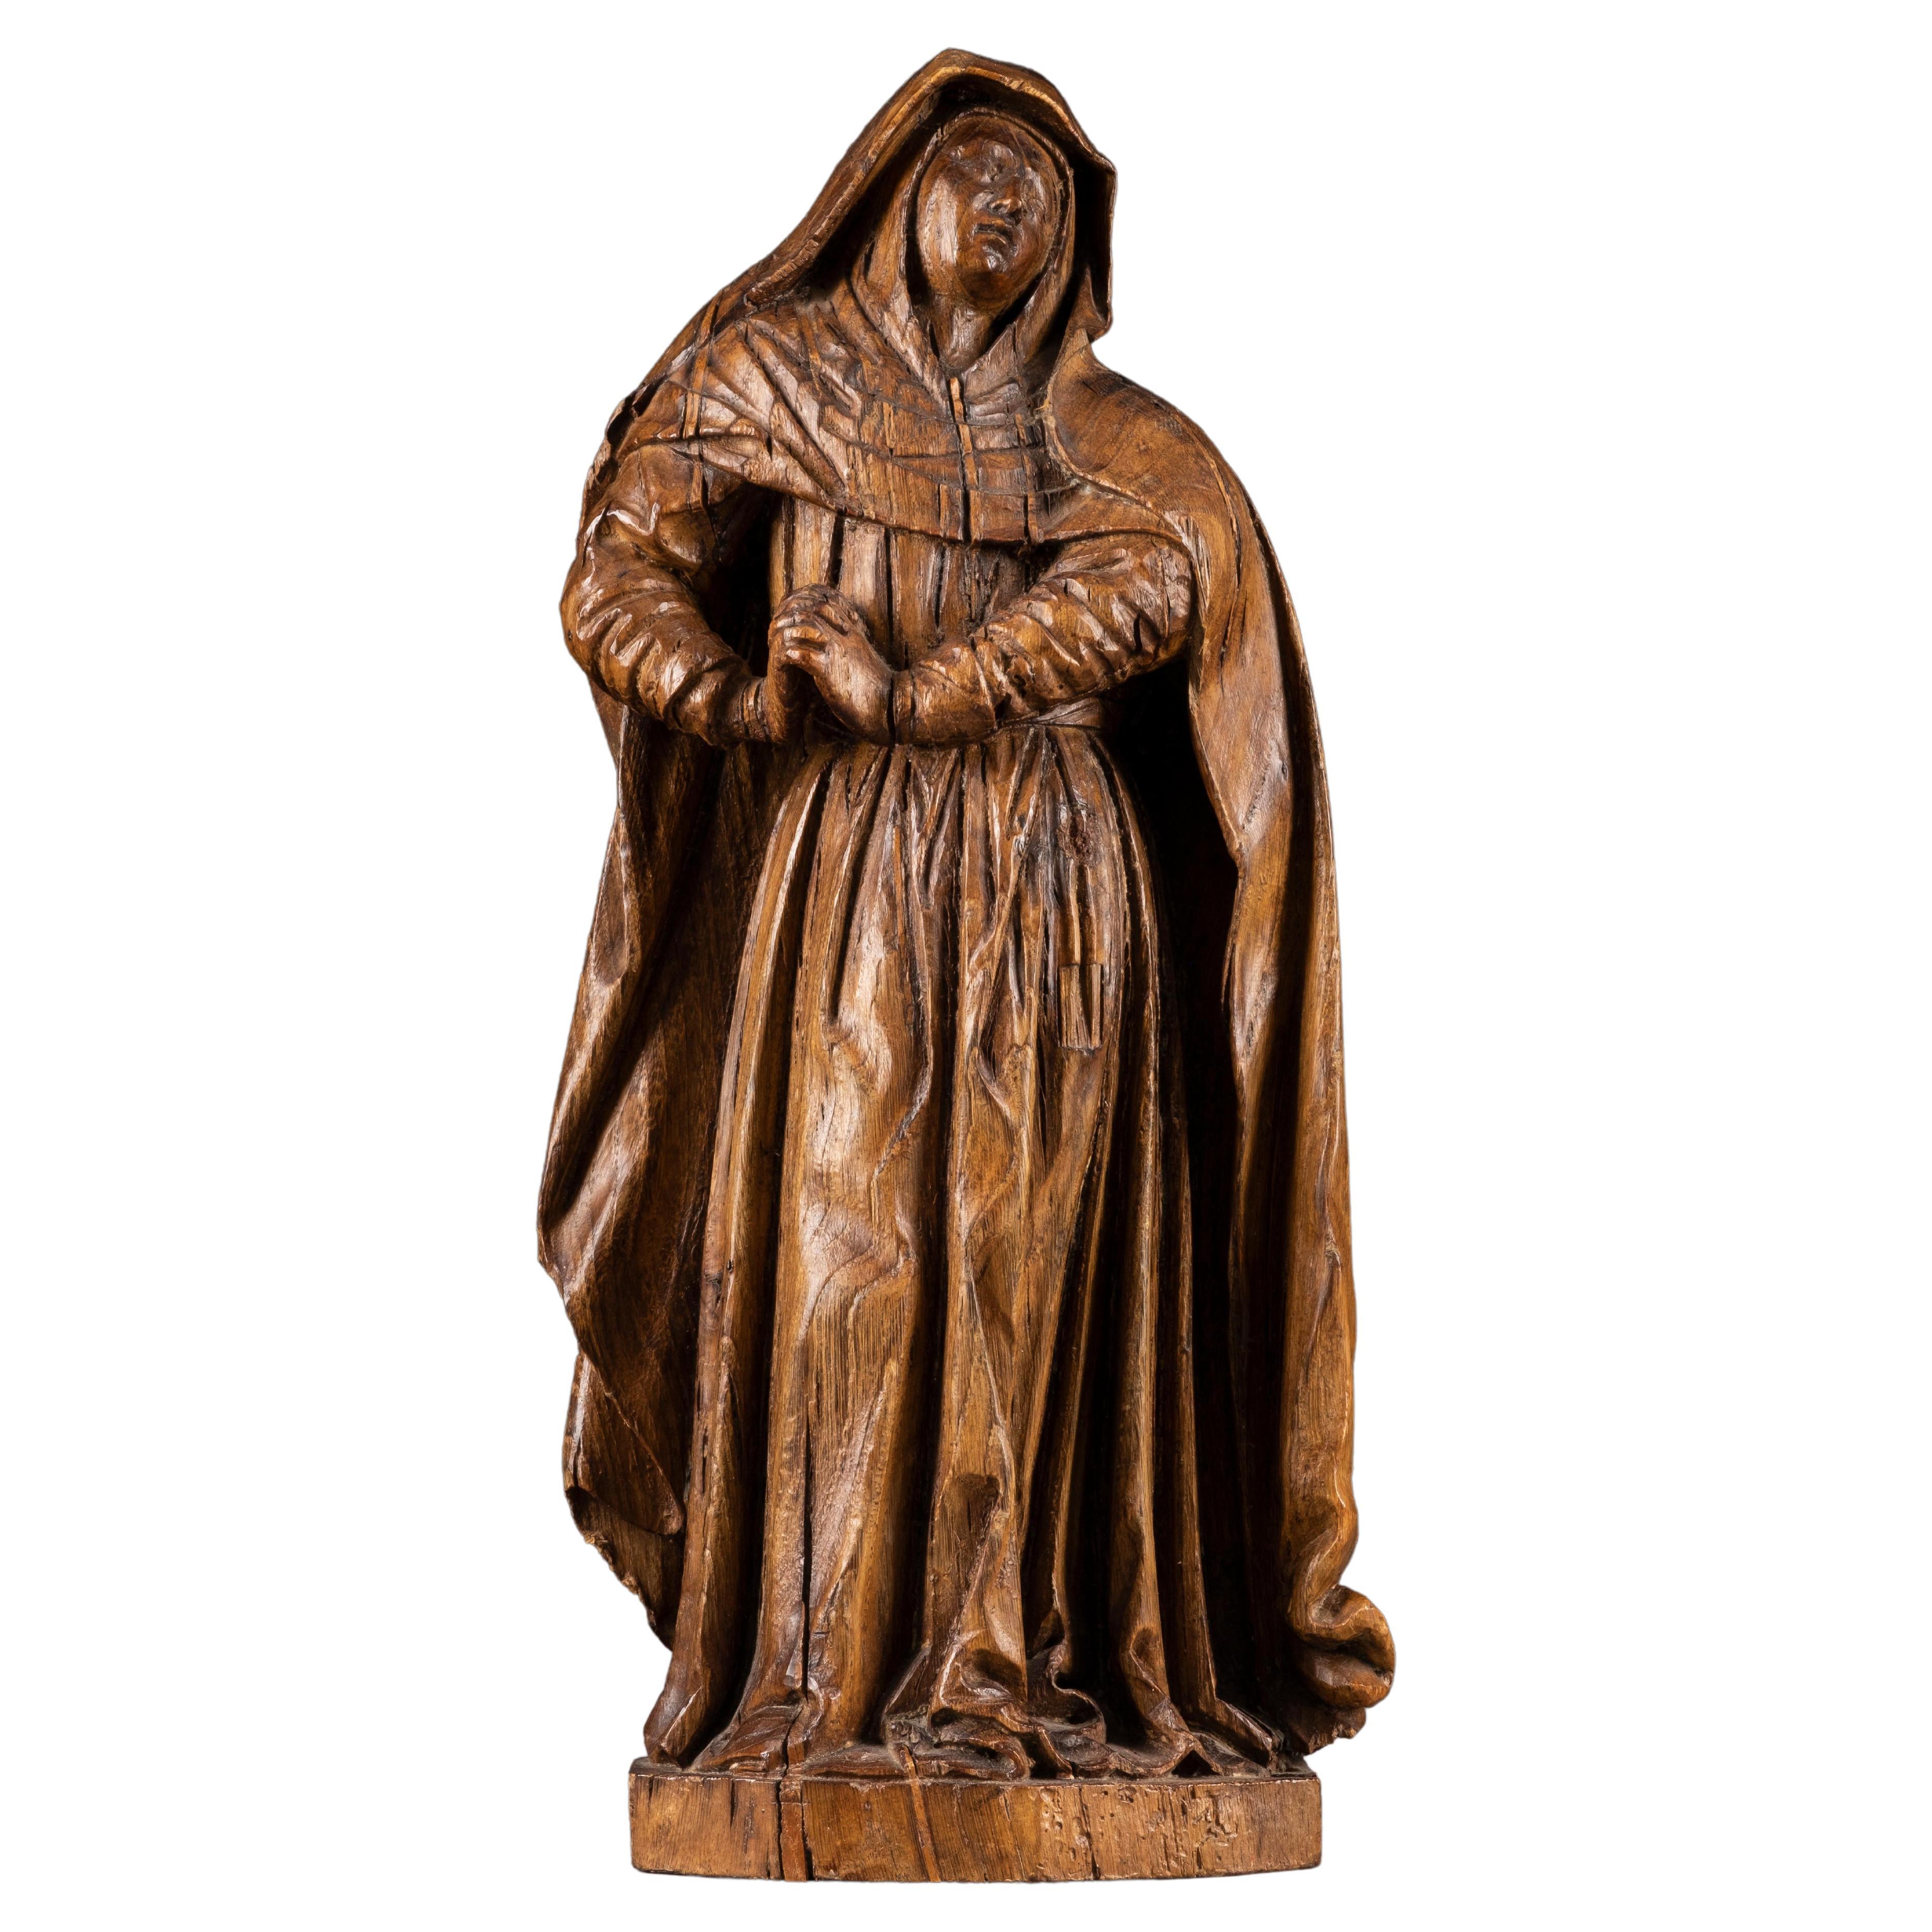 17th Century Flemish Oak Devotional Figure of the Mourning Virgin Mary